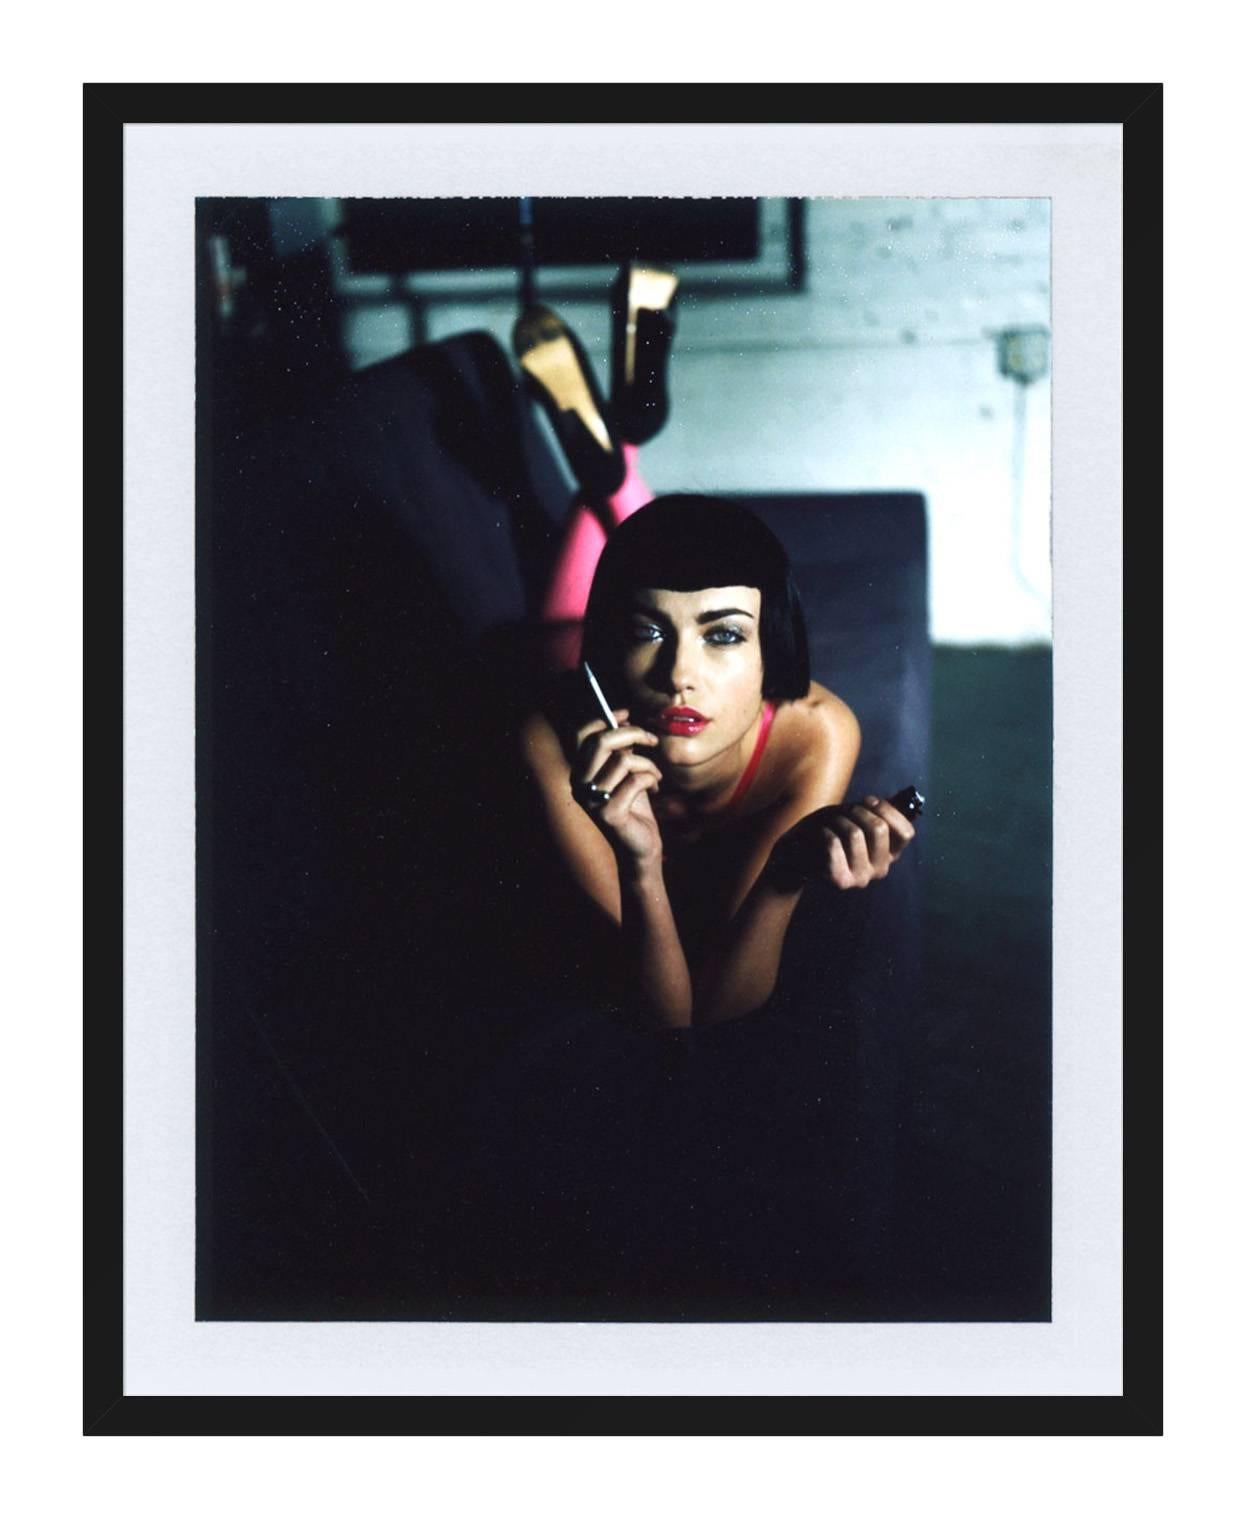 ABOUT THIS PIECE: *Polaroid image with grain and ink spots consistant with a polaroid photo.*
Raised in Mexico City, Ernesto's background is reflected in the energy of his photos. His imagery is colorful, bright and vibrant with positive energy. He